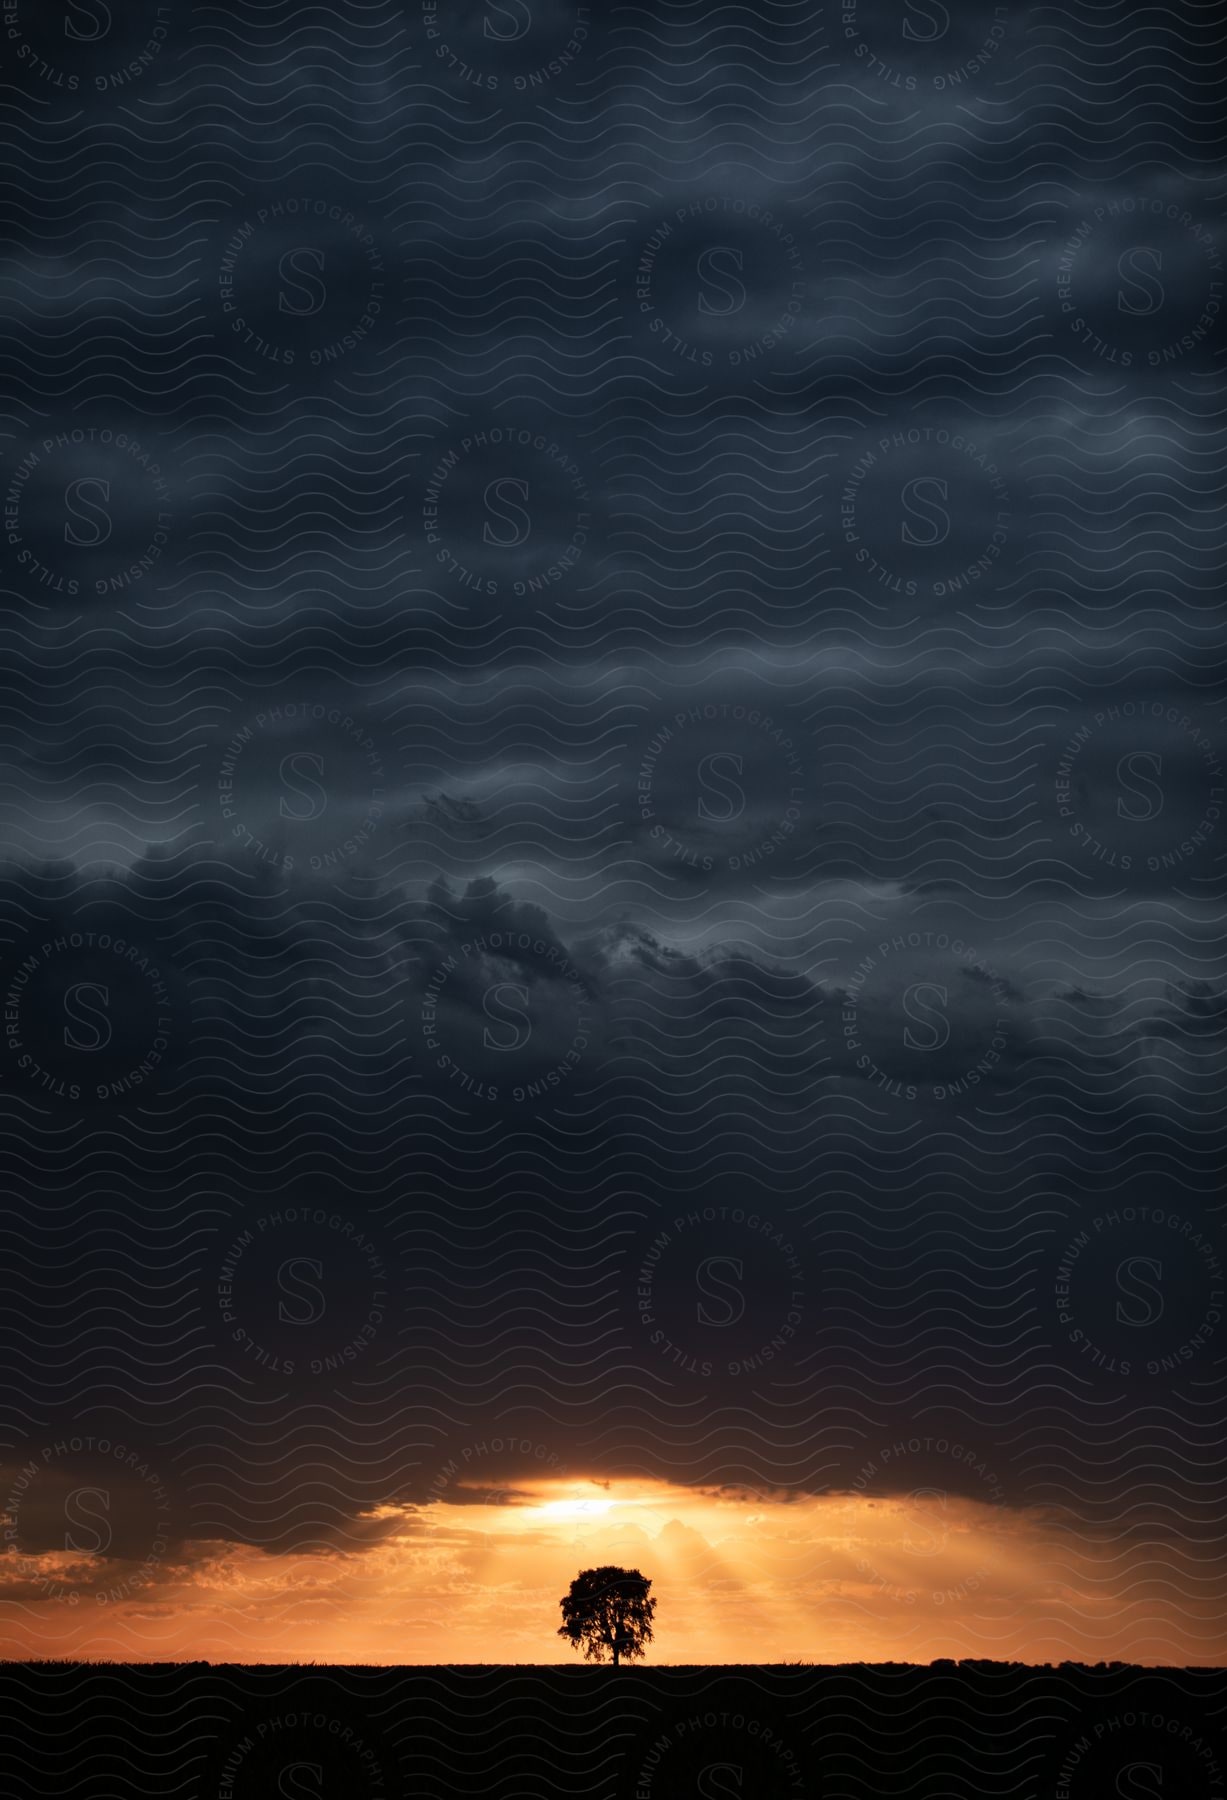 Stock photo of a silhouetted tree on a plain illuminated by the light of a sunset emerging from storm clouds